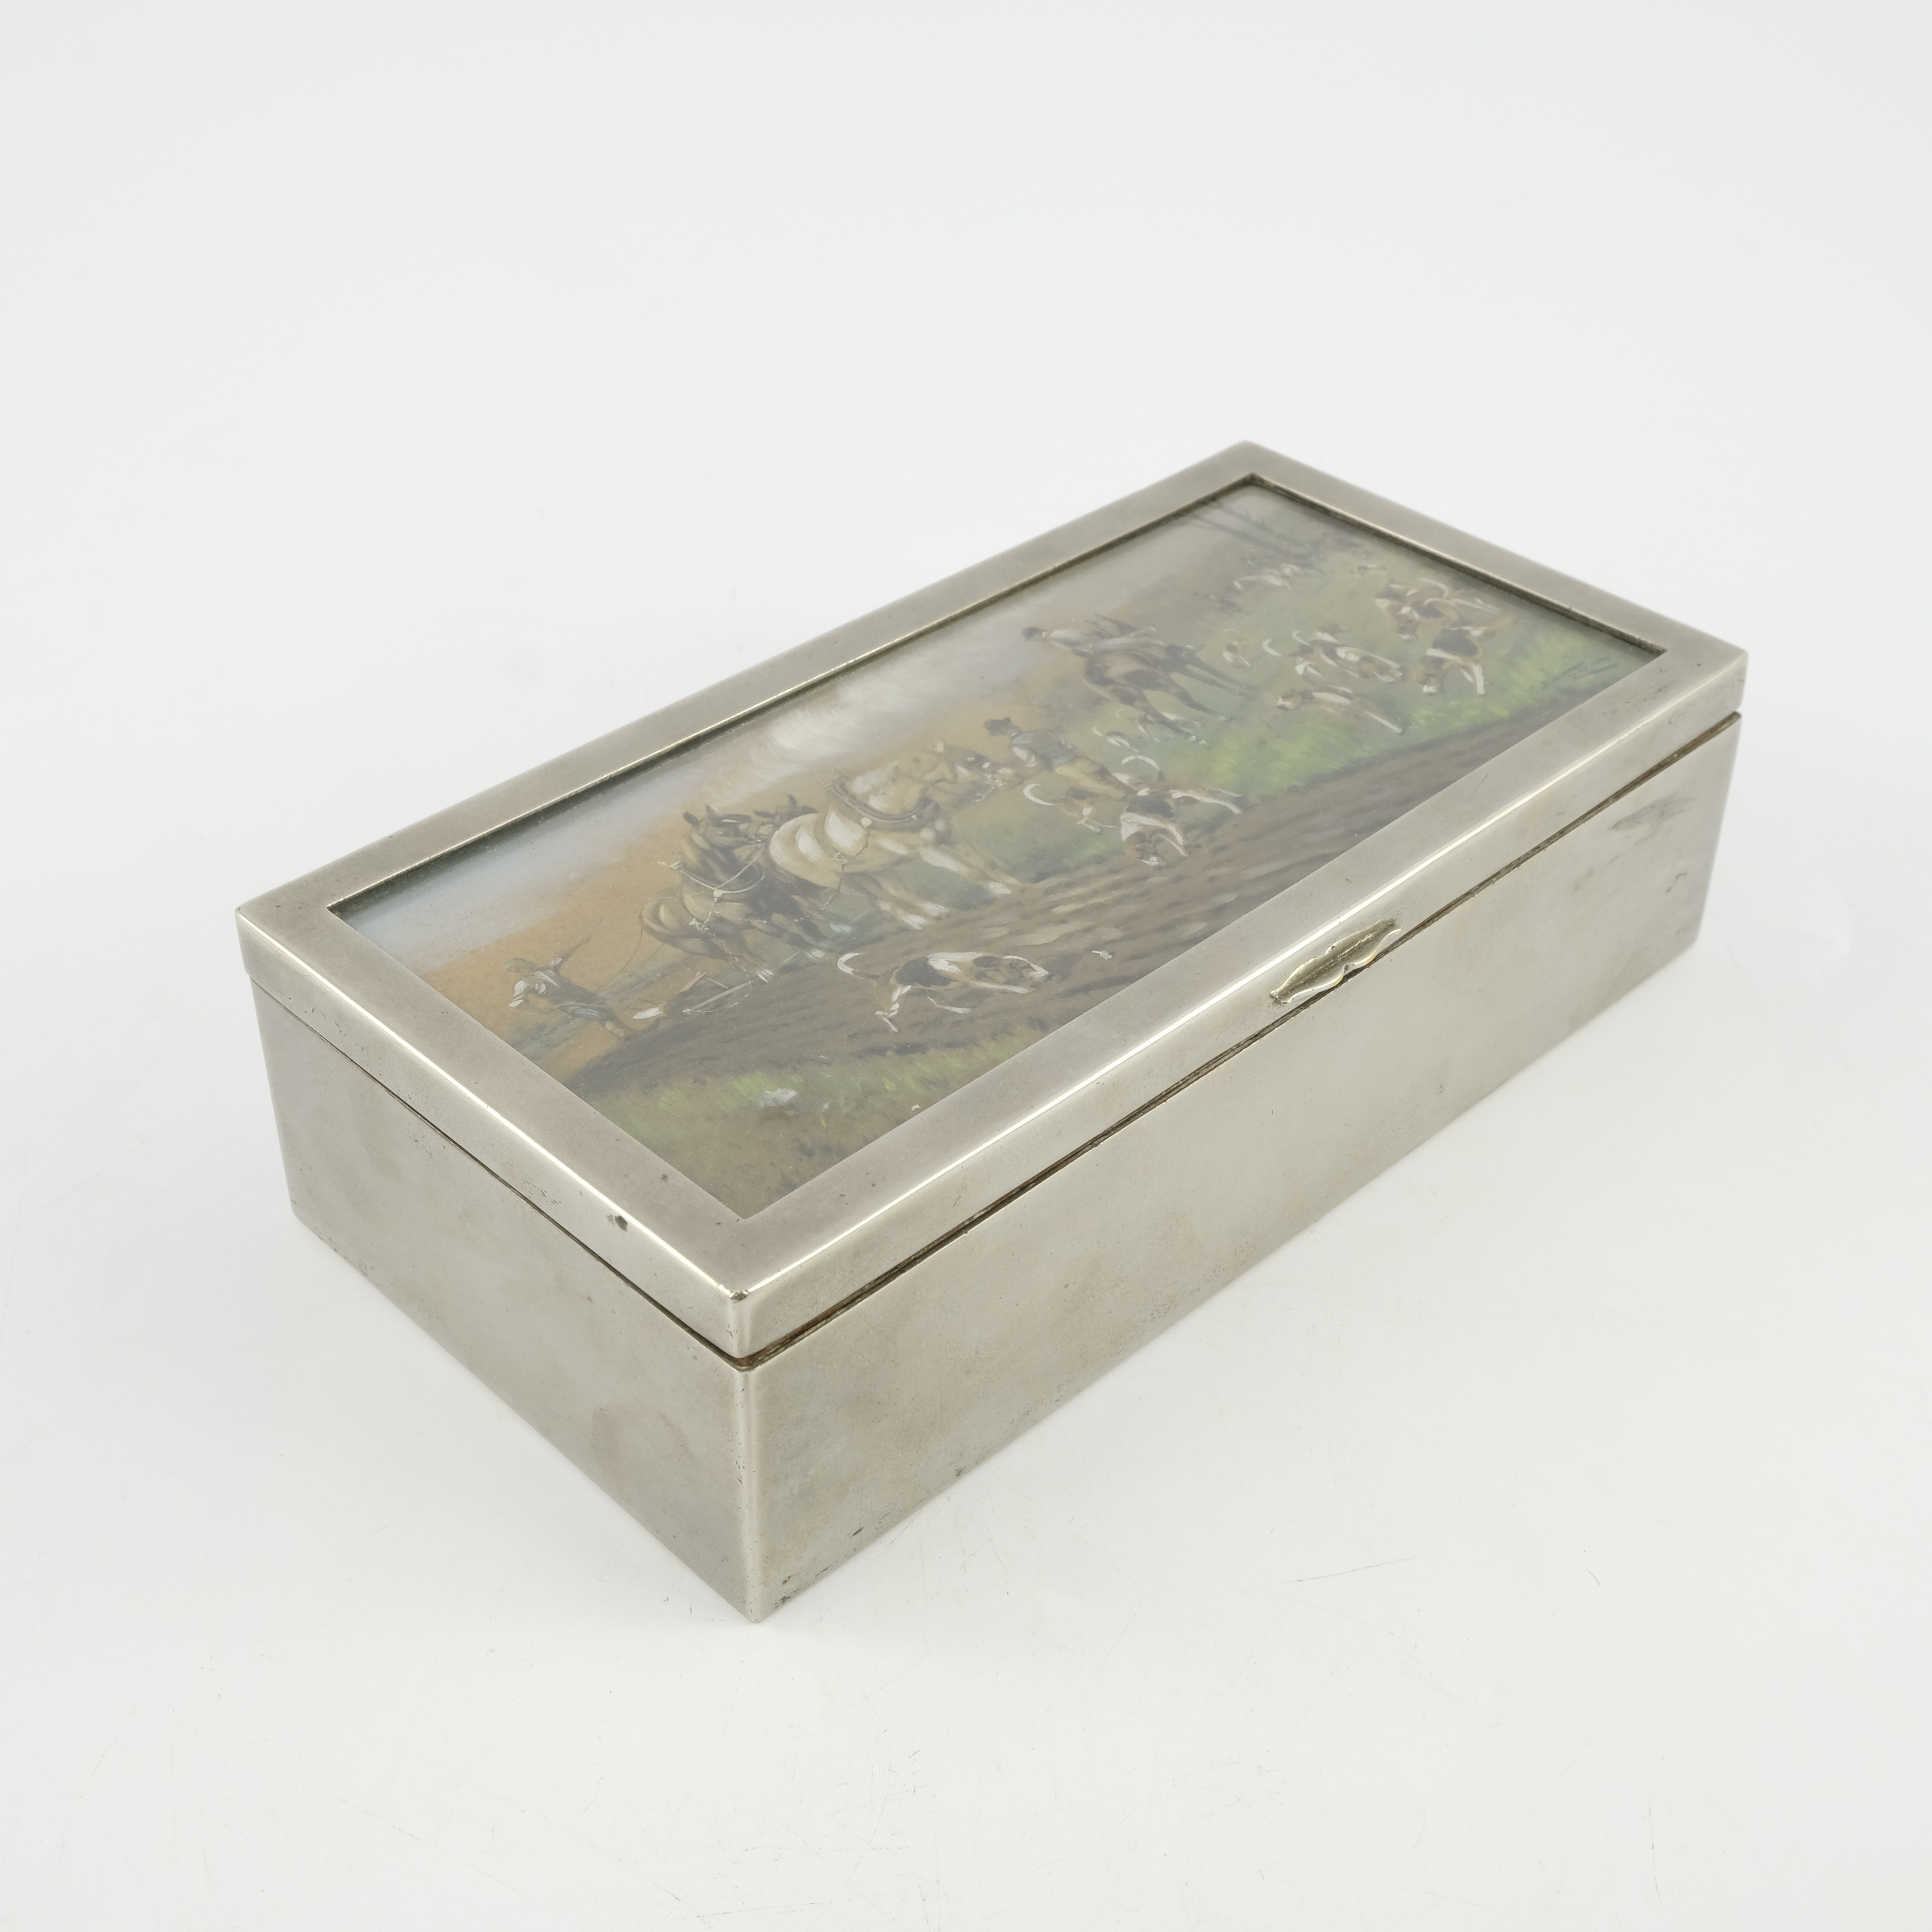 An Edwardian electroplated table cigarette casket of hunting interest, the cover with an inset